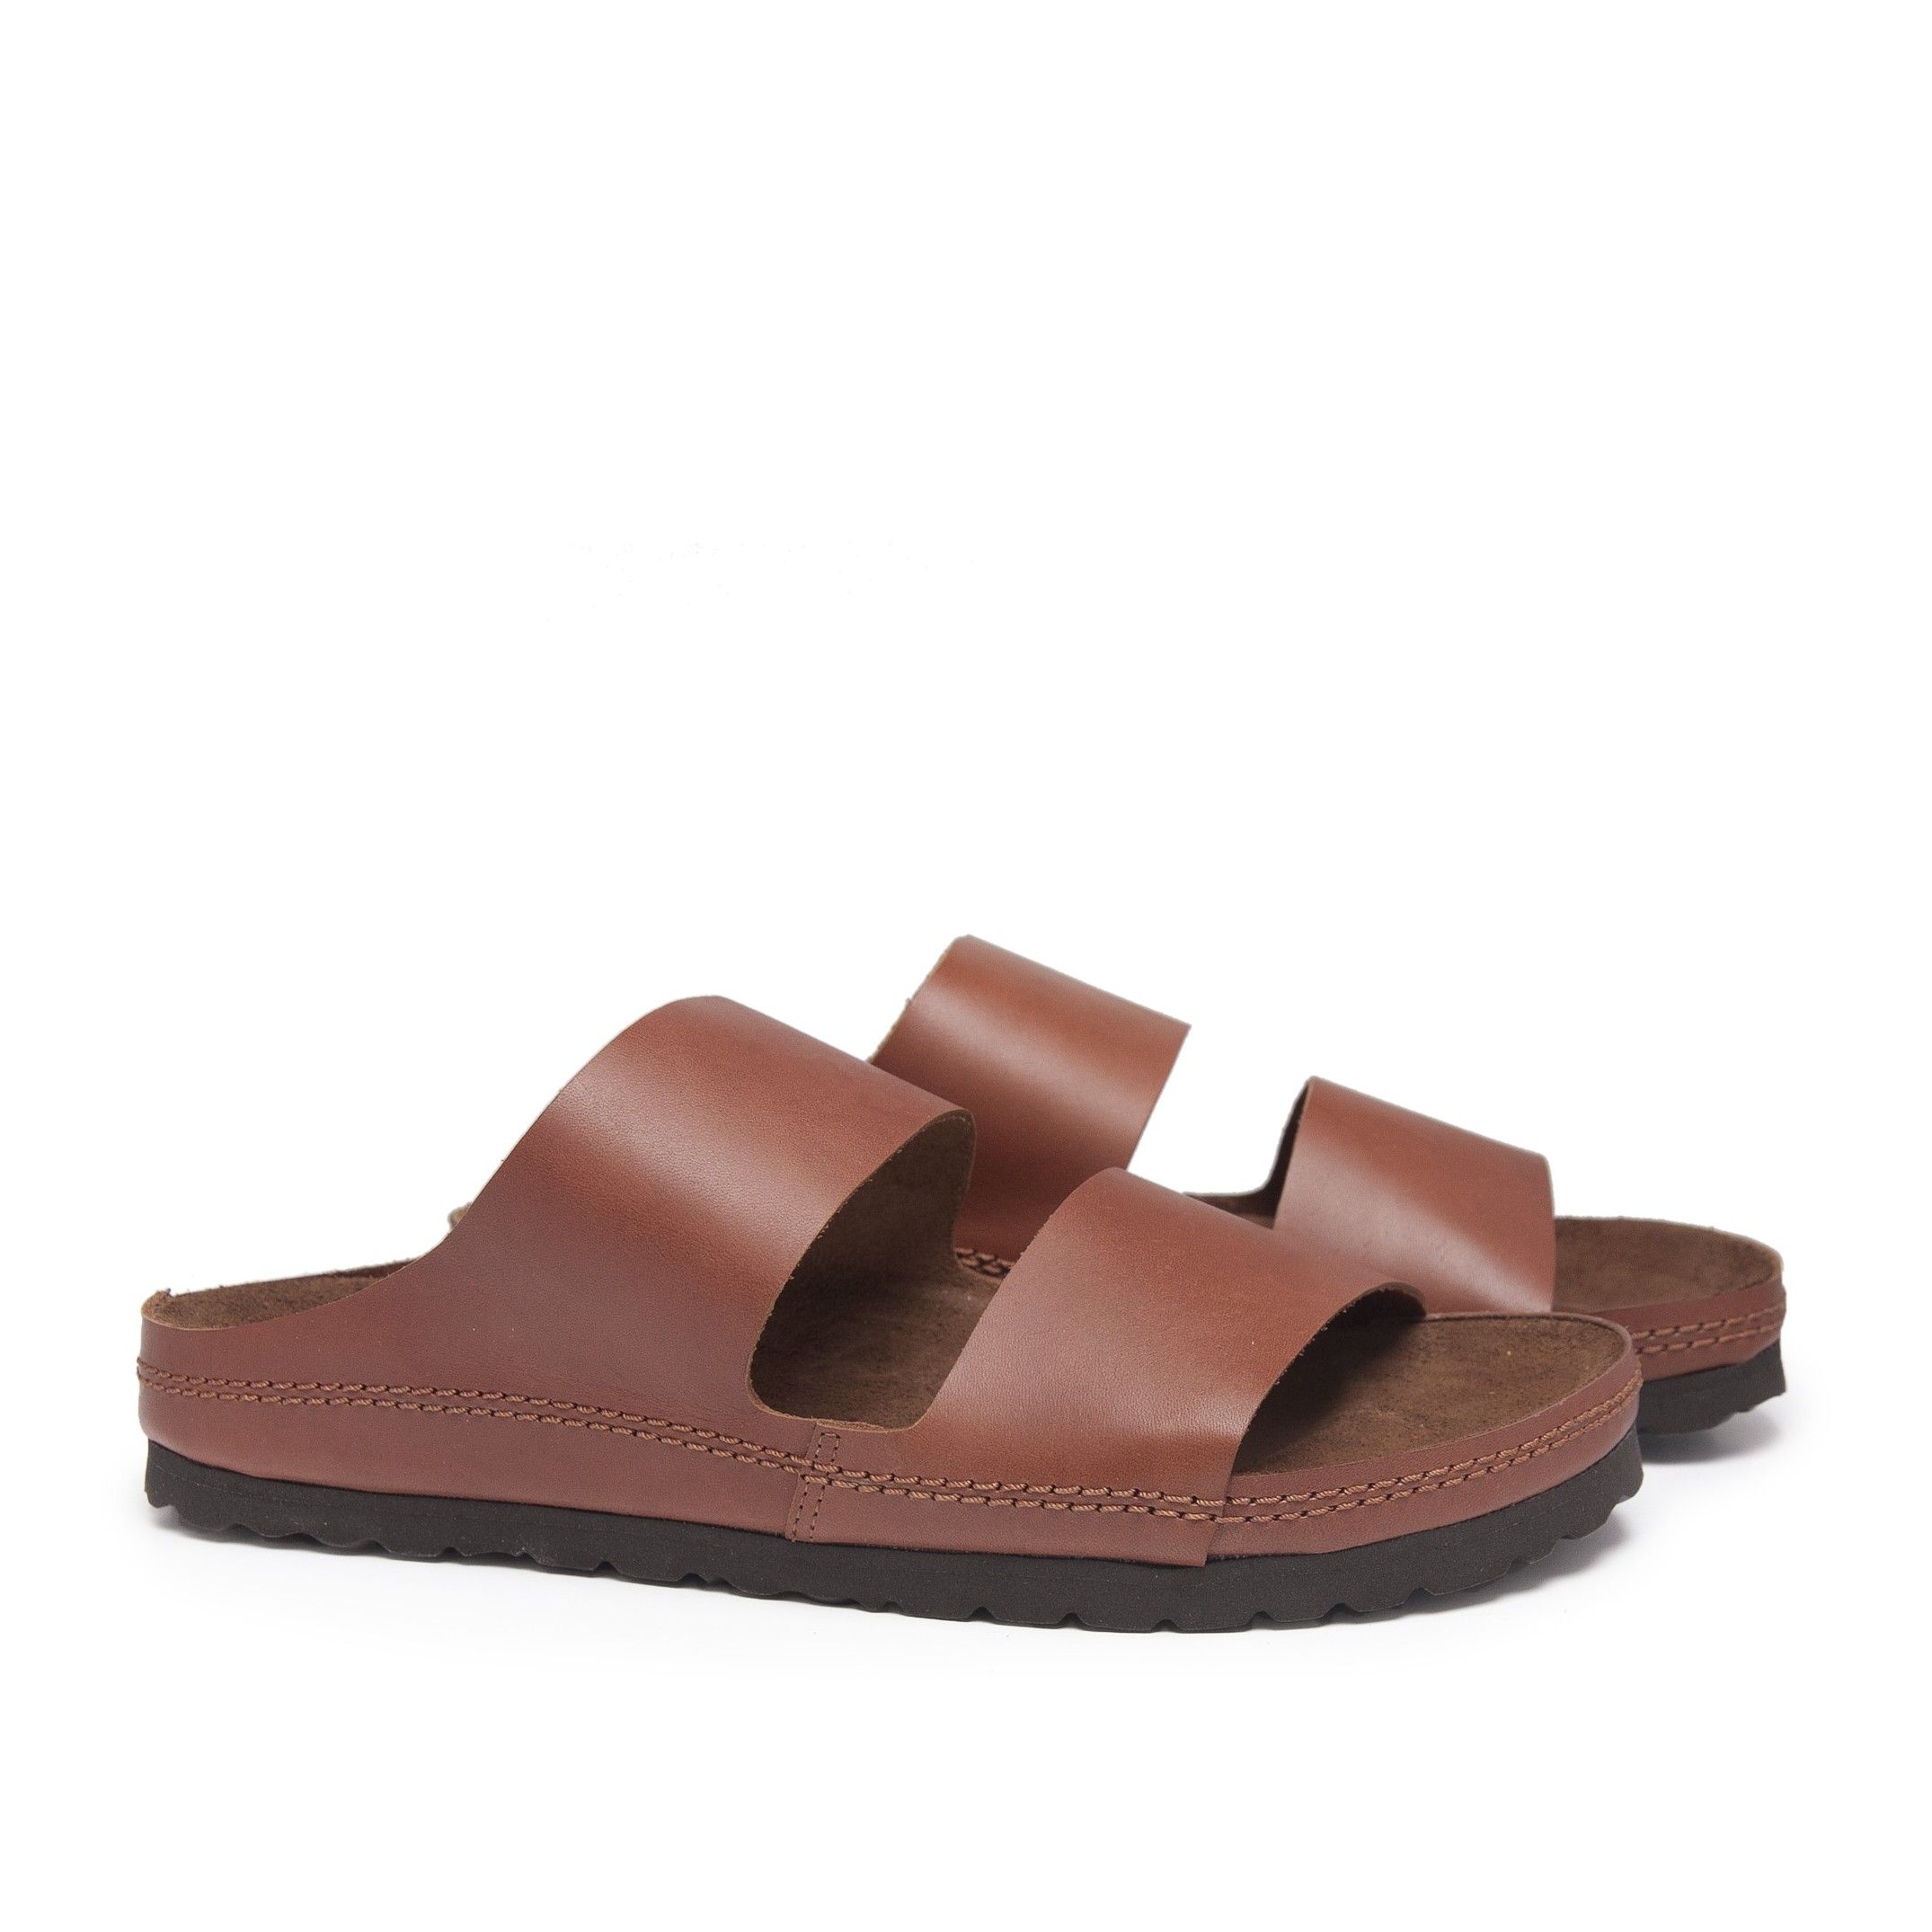 Bio sandal wide leather strips. Upper and inner made of leather. Insole: leather. Sole: EVA. This product is manufactured in Spain.